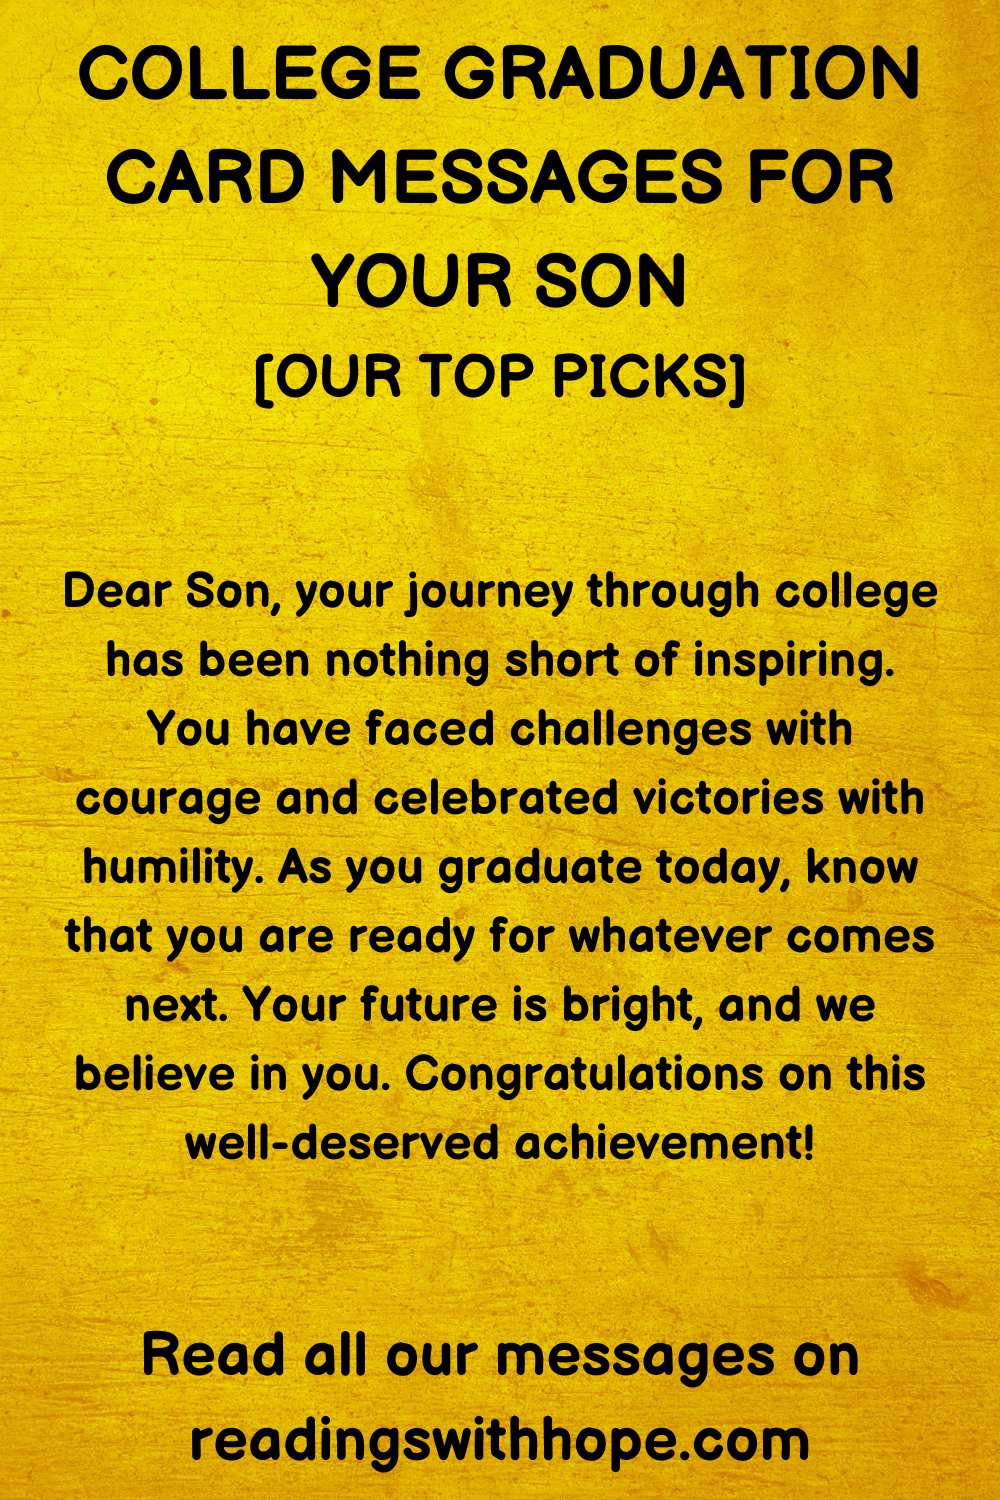 College Graduation Card Message for Son 2